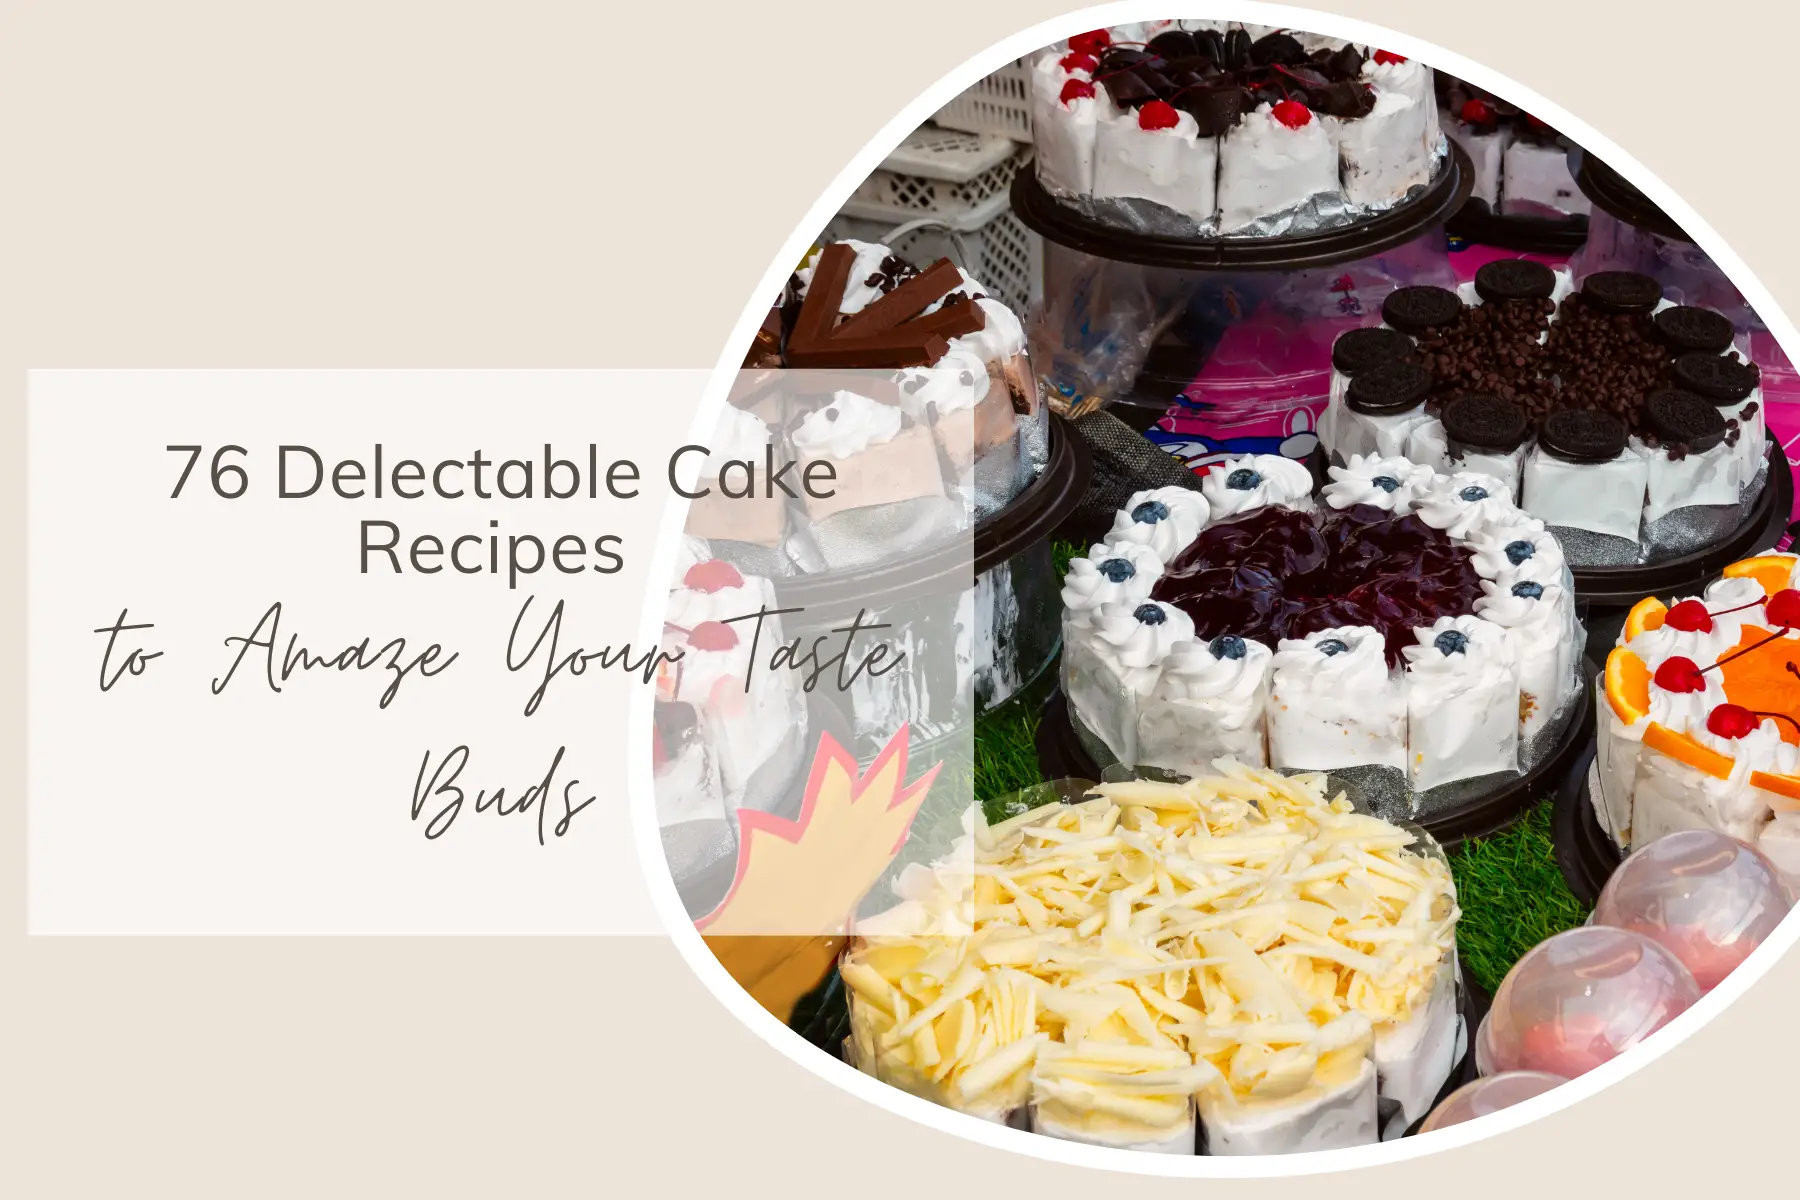 76 Delectable Cake Recipes to Amaze Your Taste Buds